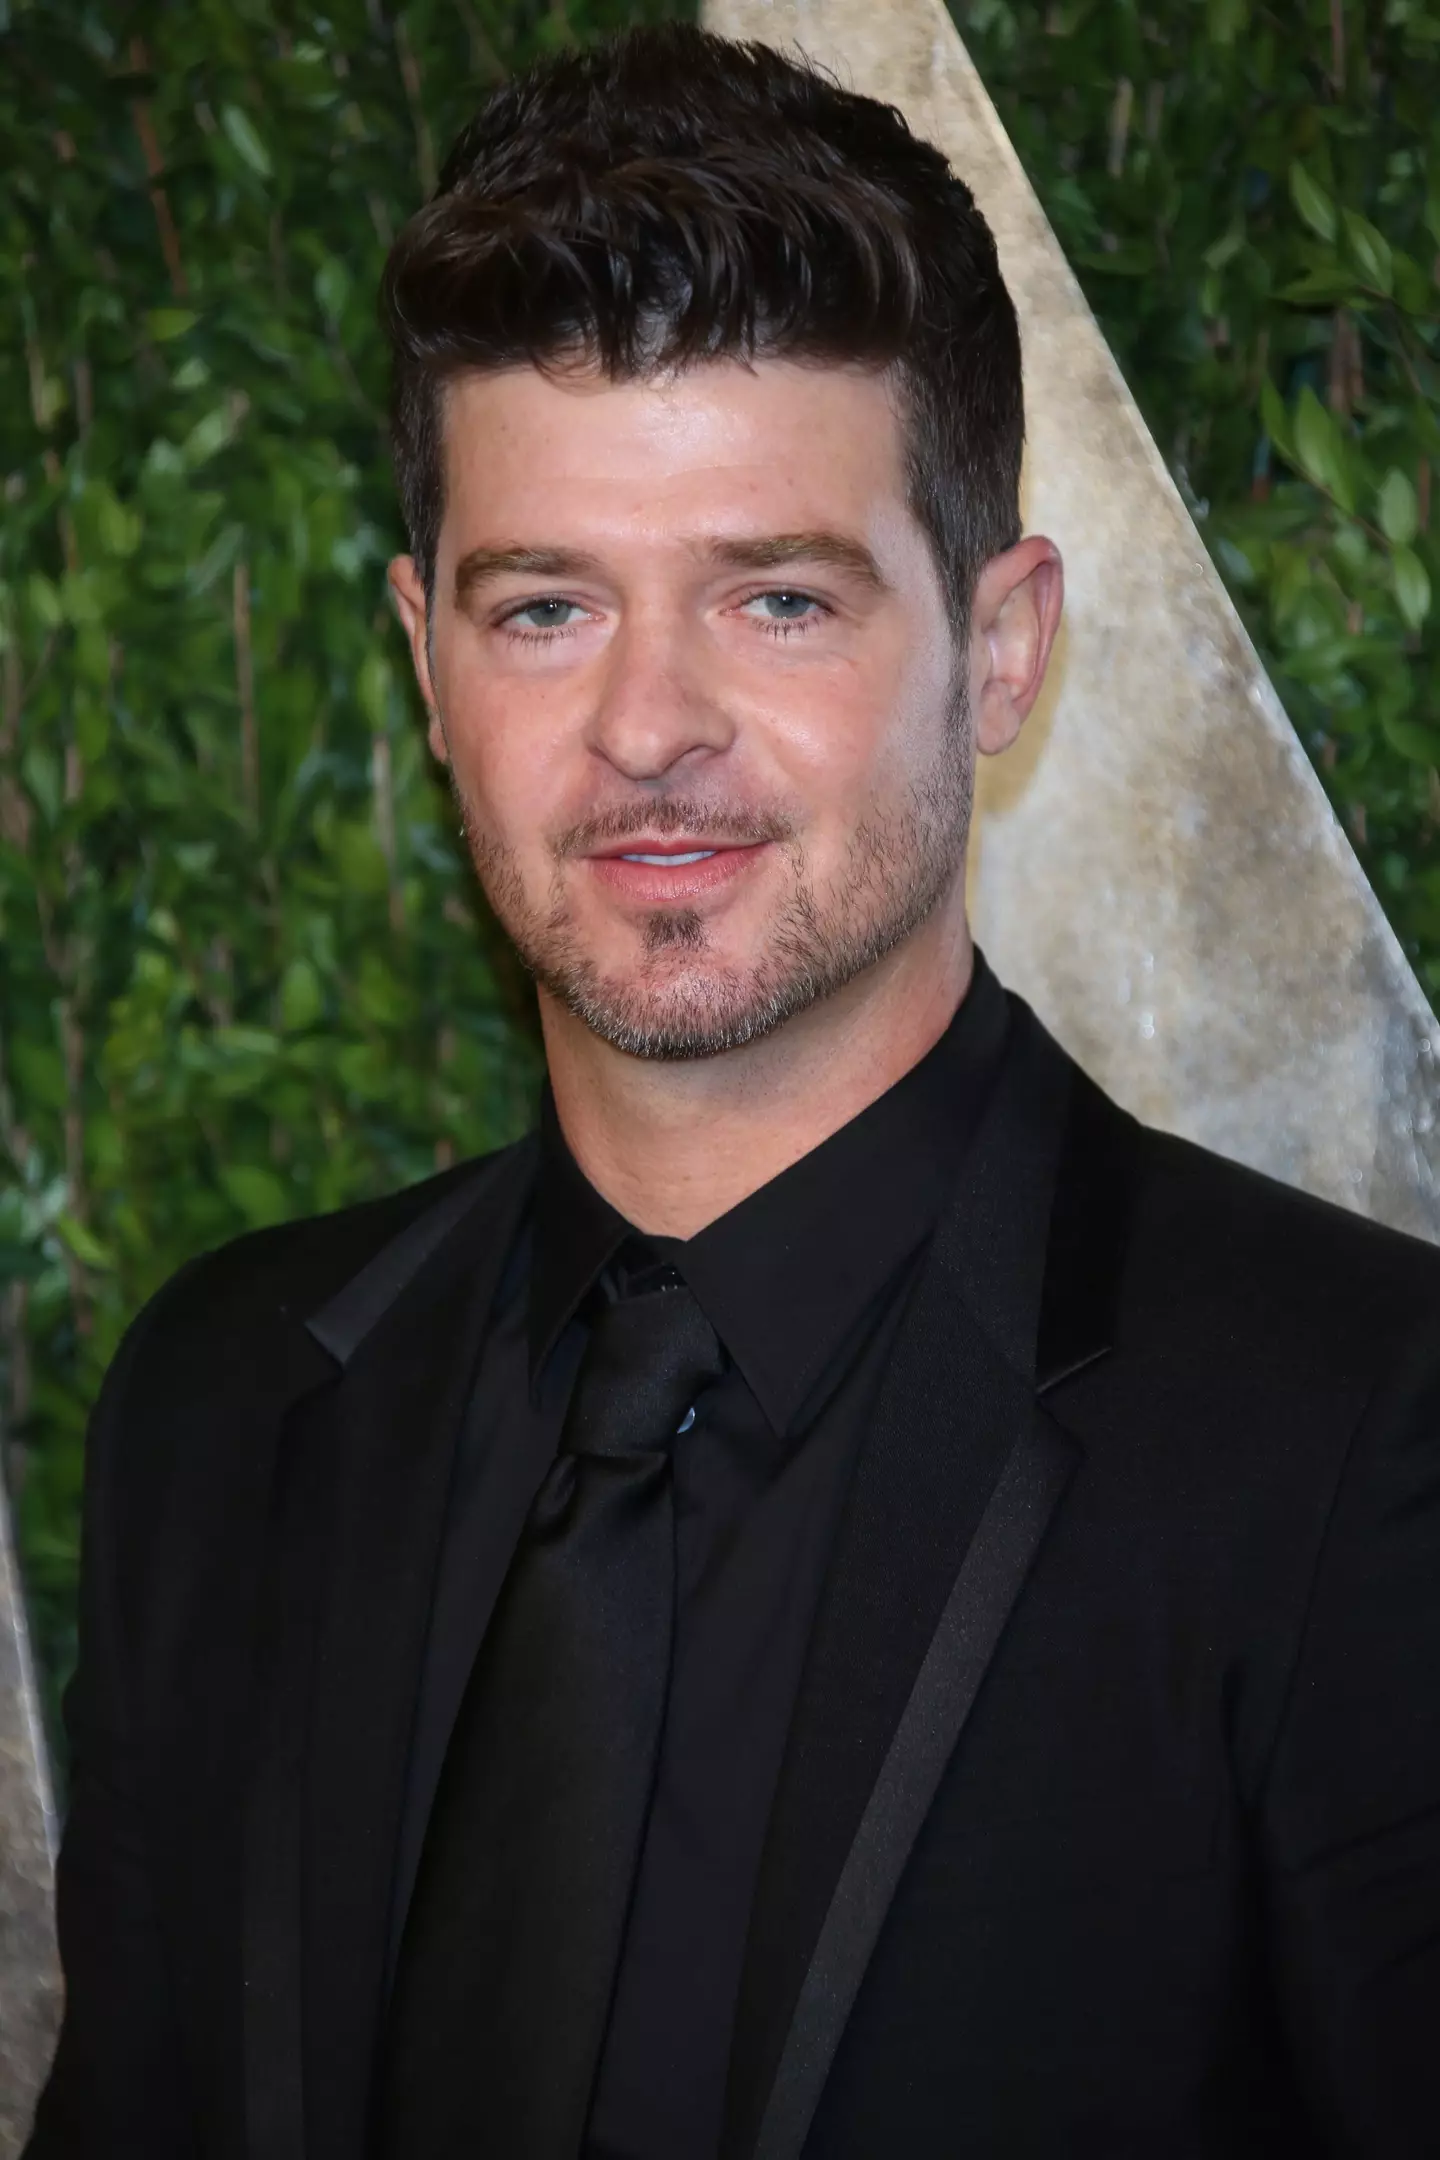 Thicke has not yet publicly responded to Ratajkowski's essay.